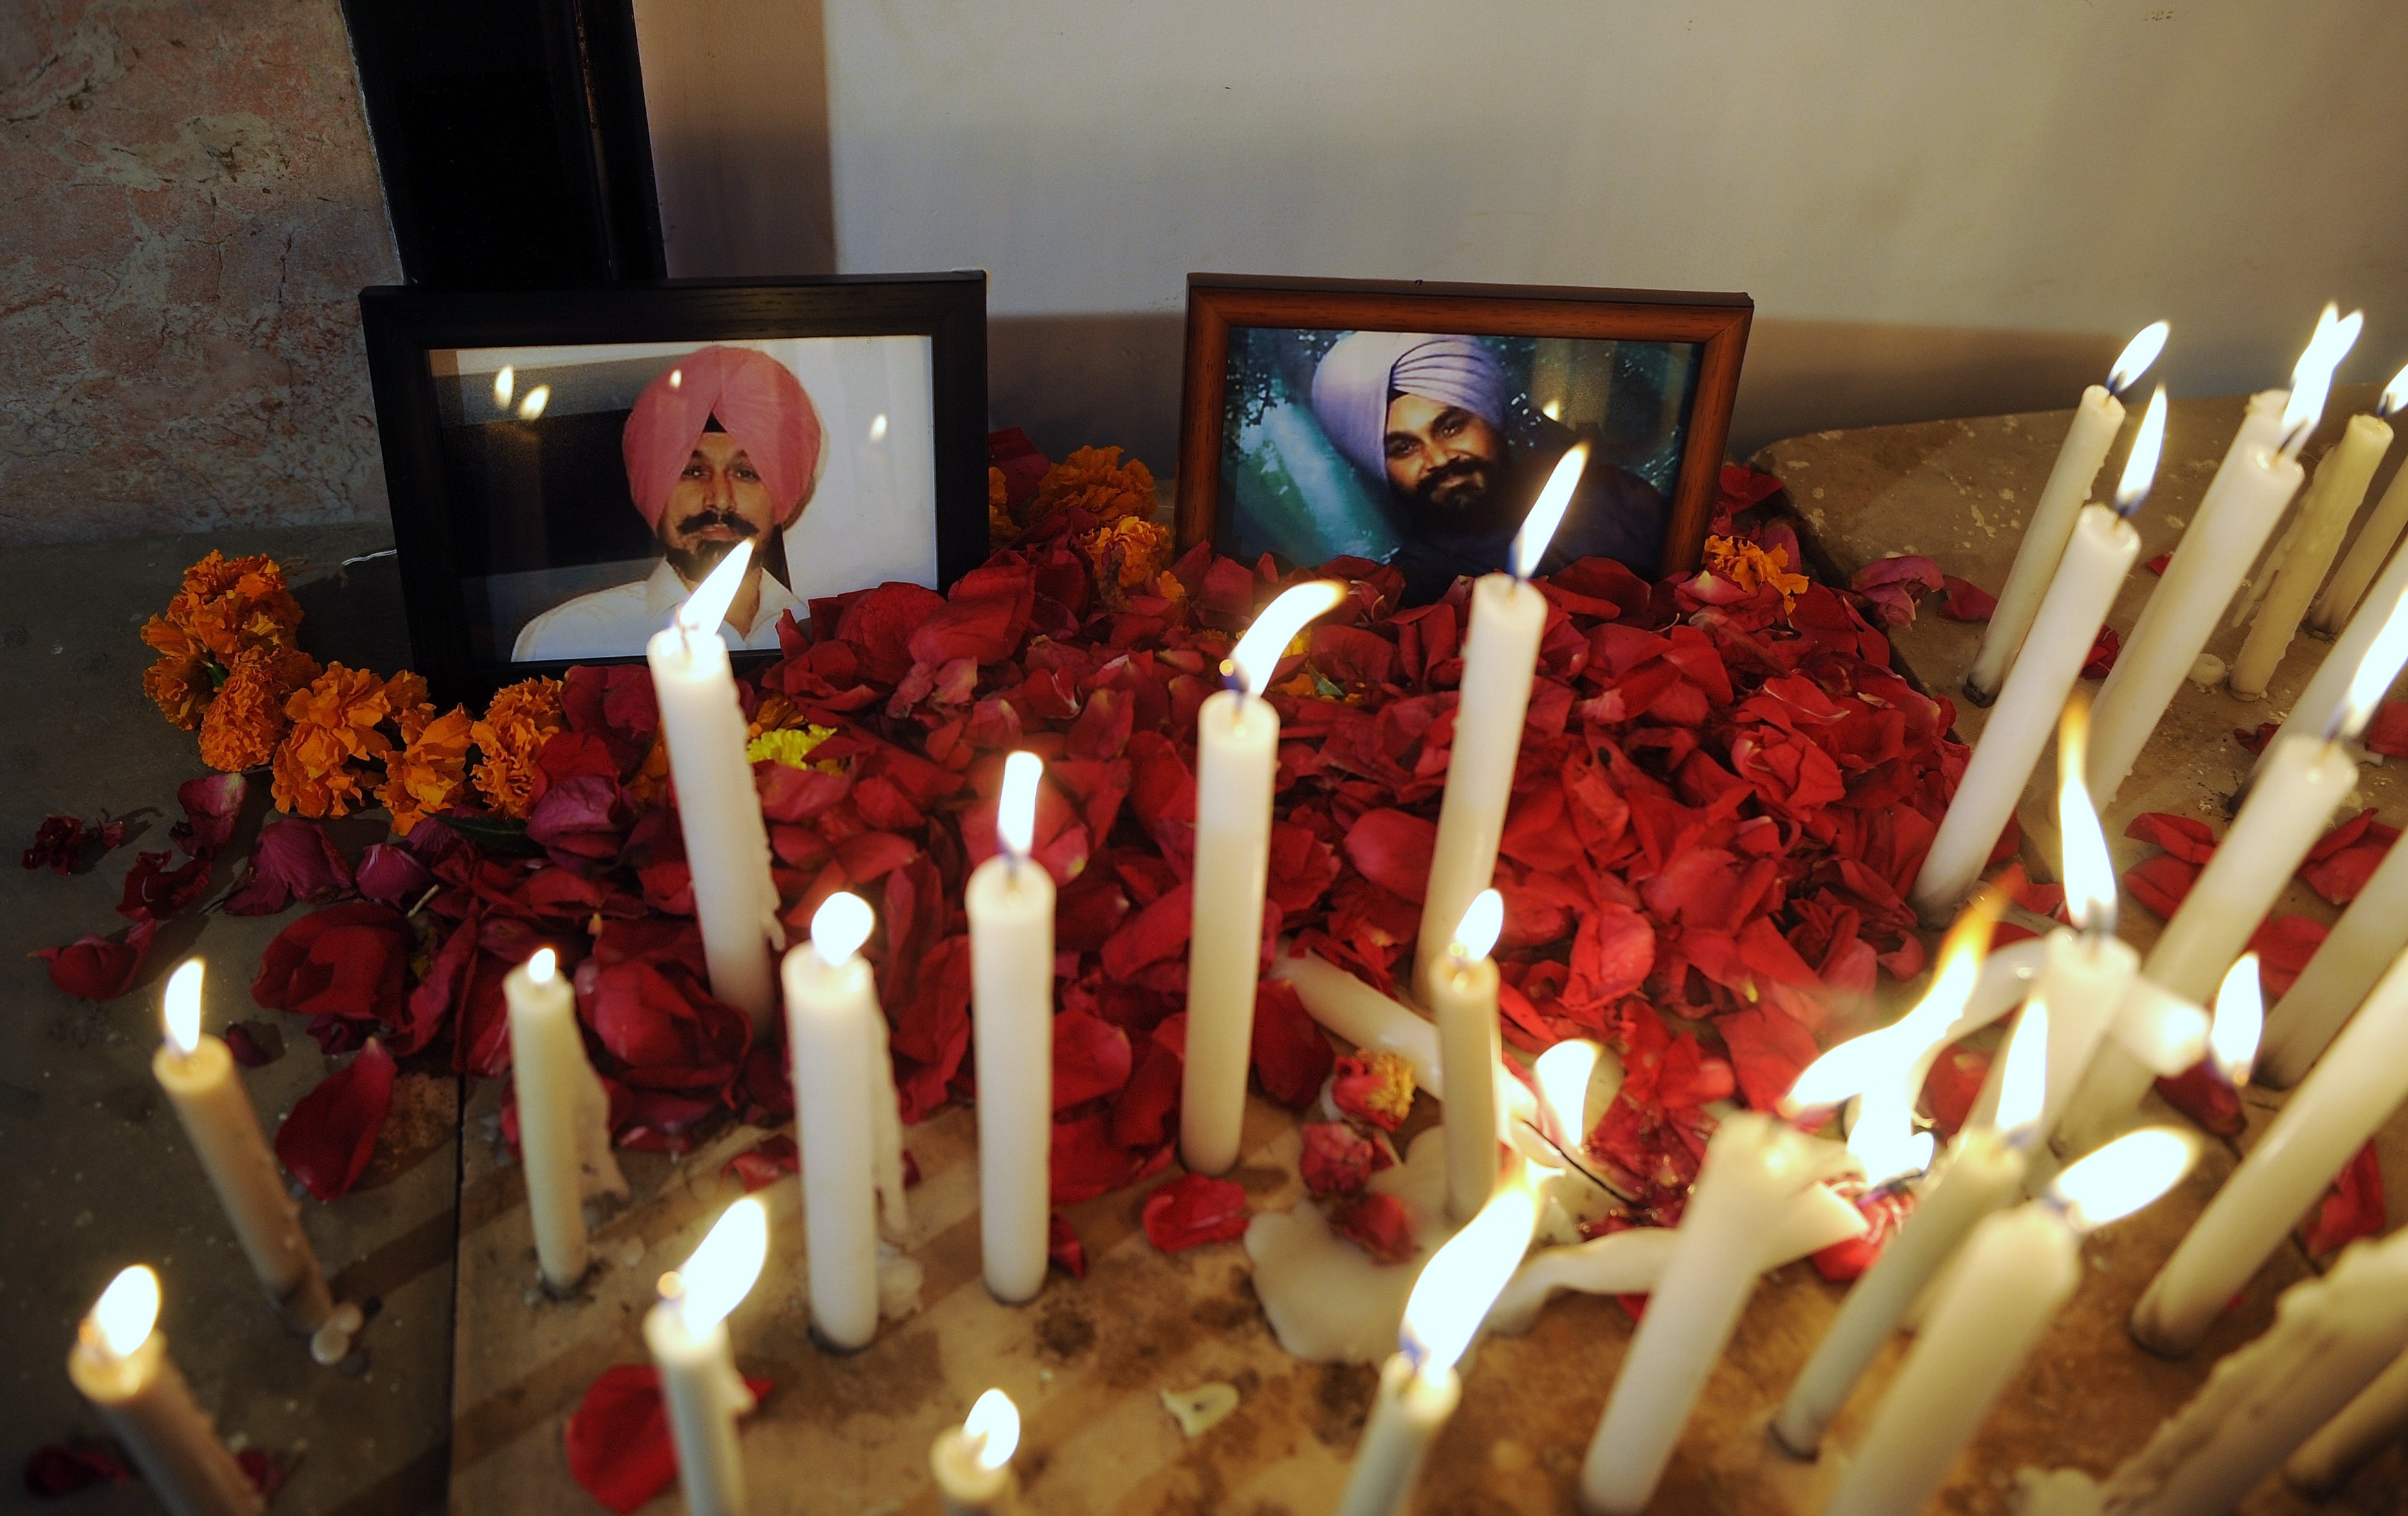 Indian Sikhs place flower petals and candles near pictures of those killed at a Sikh Temple shooting in the United States during a vigil in Mumbai on August 8, 2012. A suspected gunman, 40-year-old Wade Michael Page, allegedly killed six people at a Sikh temple in the United States on August 5, and was shot to death by police at the scene.